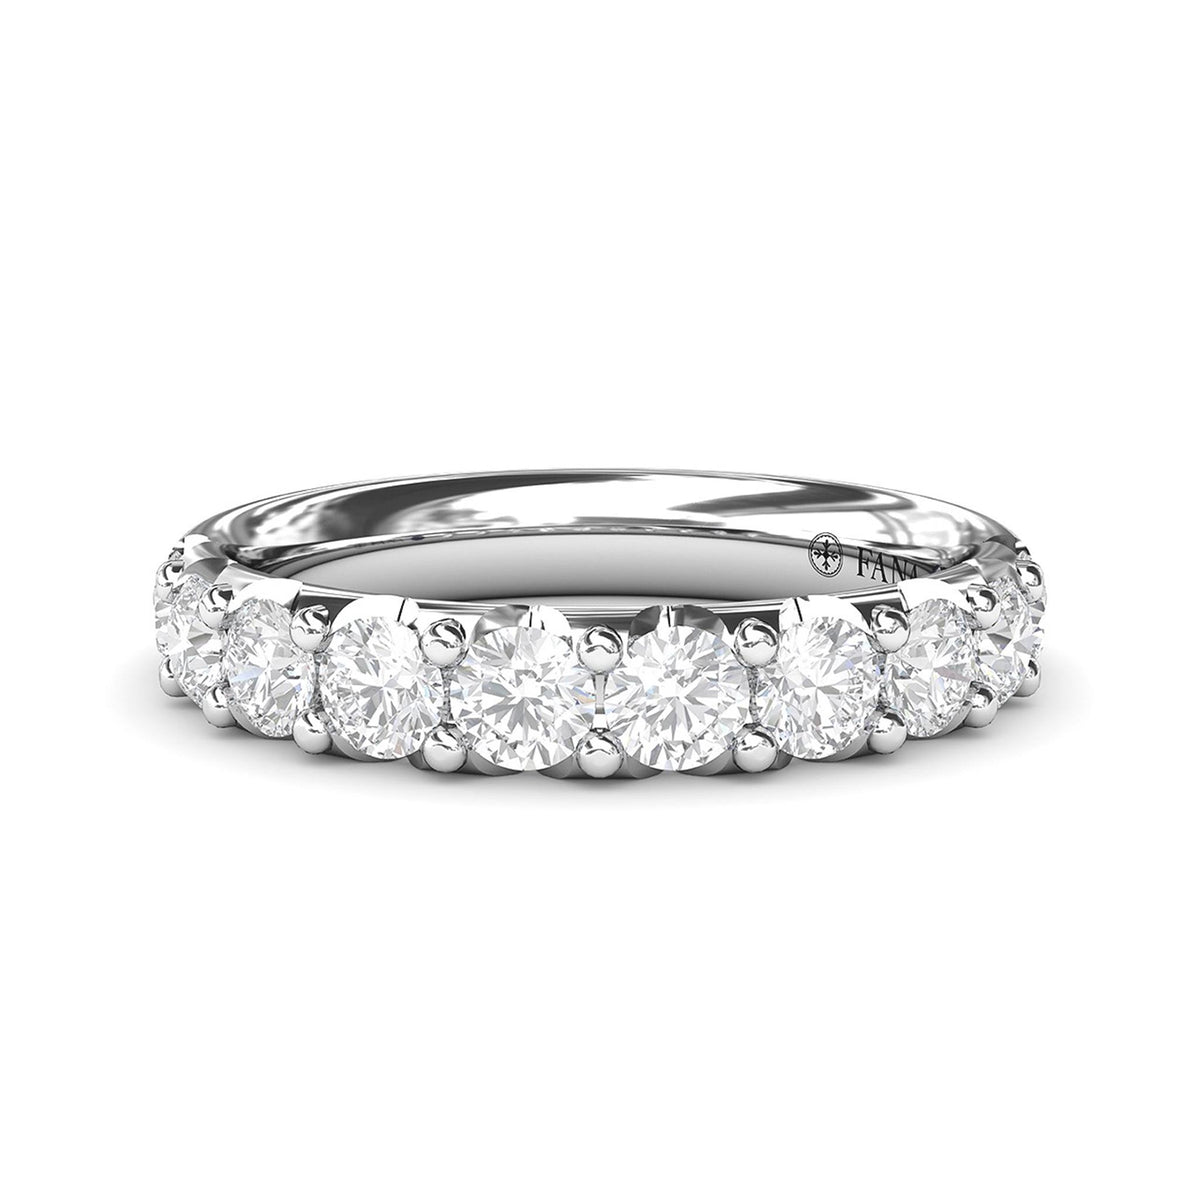 14Kt White Gold Prong Set Wedding Ring With 1.05cttw Natural Diamonds